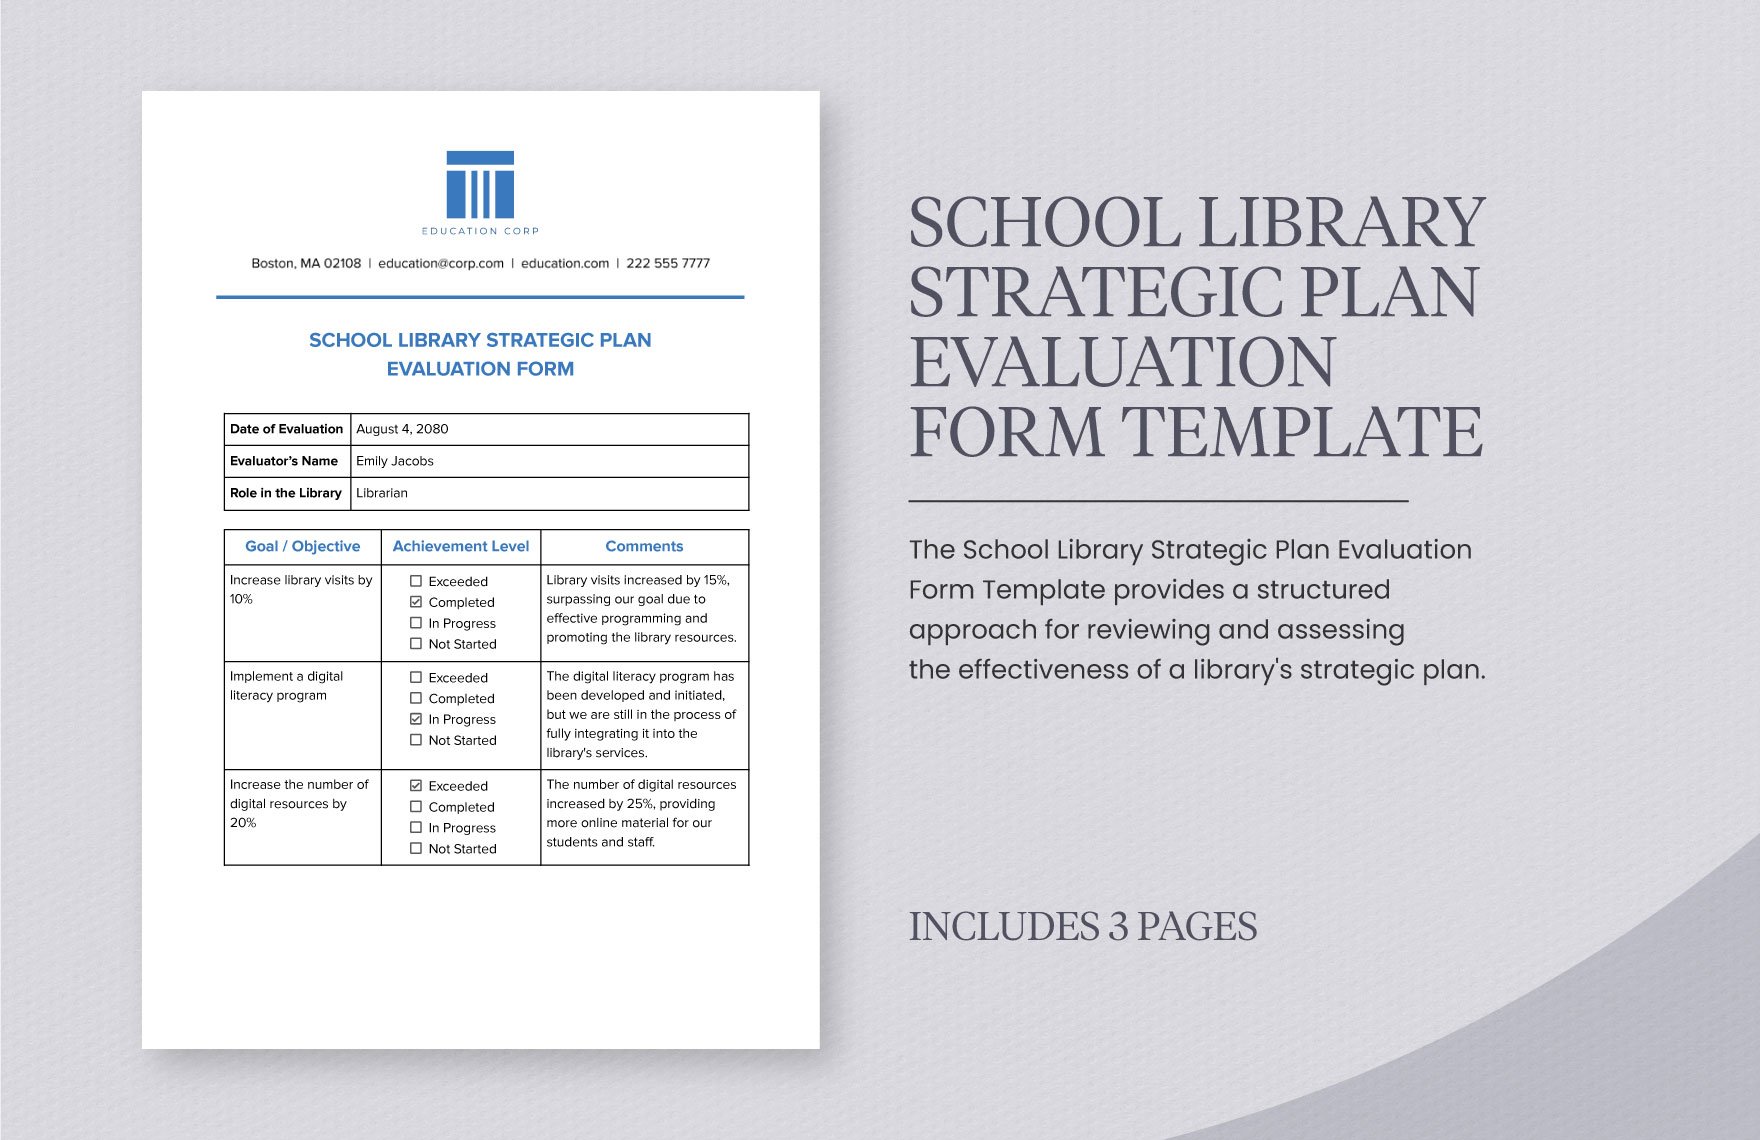 School Library Strategic Plan Evaluation Form Template